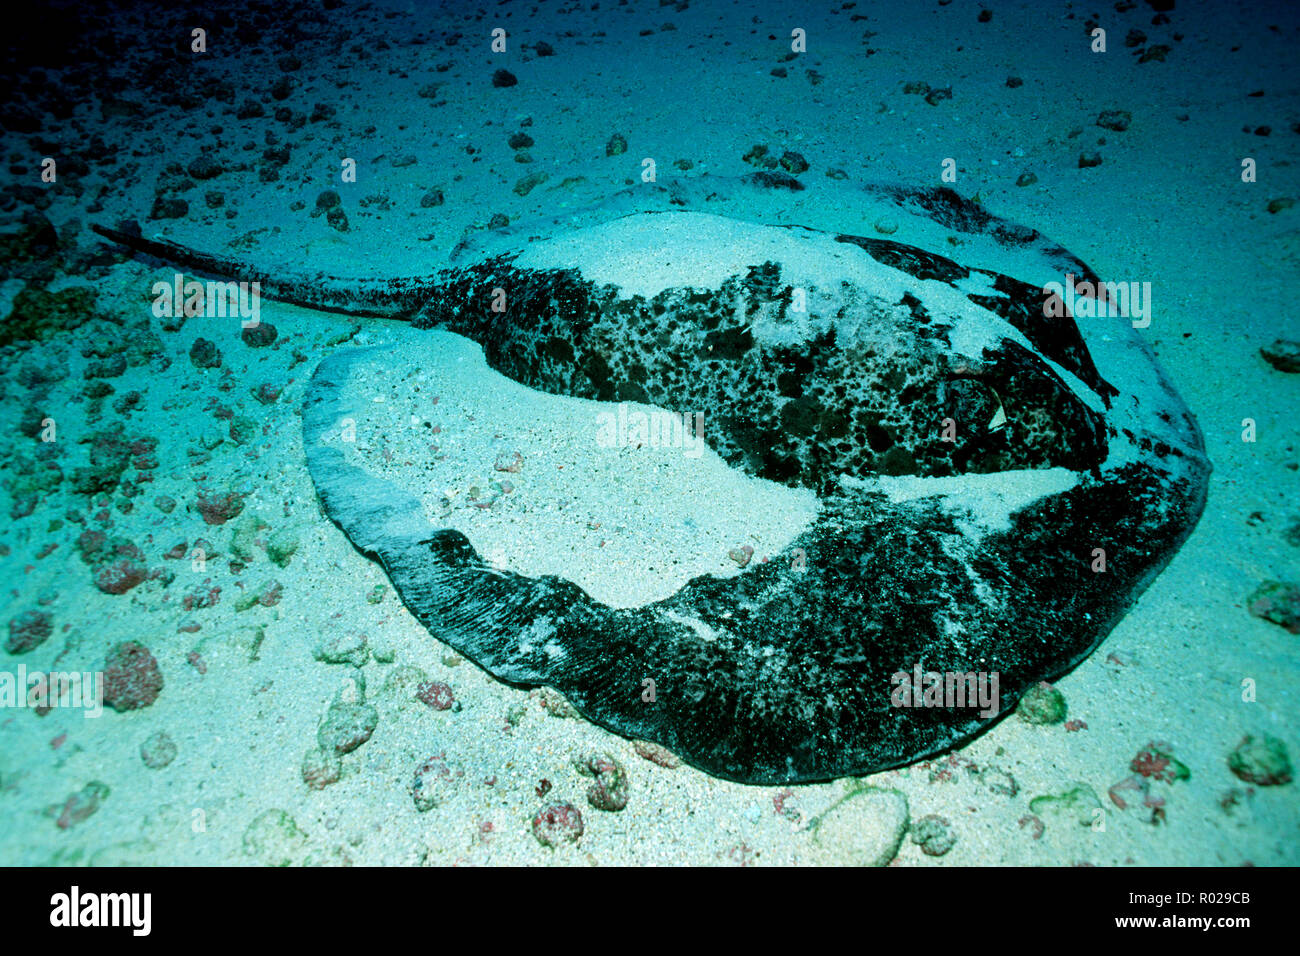 Marbled ribbontail ray, Taeniura melanospilos, bury themselves in the sand, avoiding potential predators, Cocos Island, Pacific Ocean Stock Photo